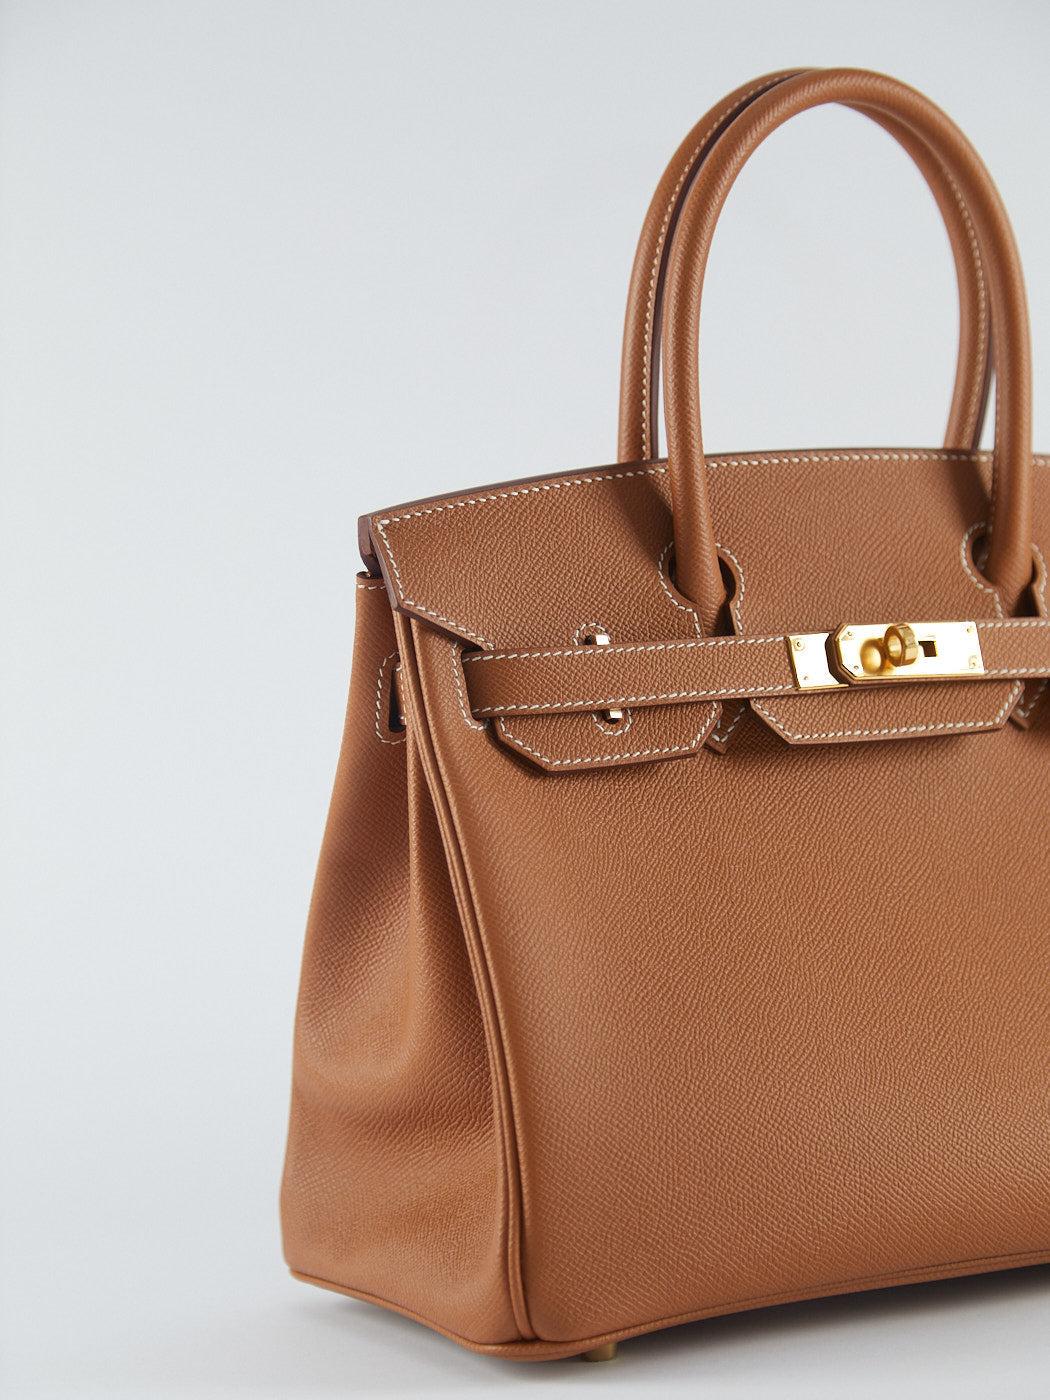 HERMÈS BIRKIN 30CM GOLD Epsom Leather with Gold Hardware In Excellent Condition For Sale In London, GB